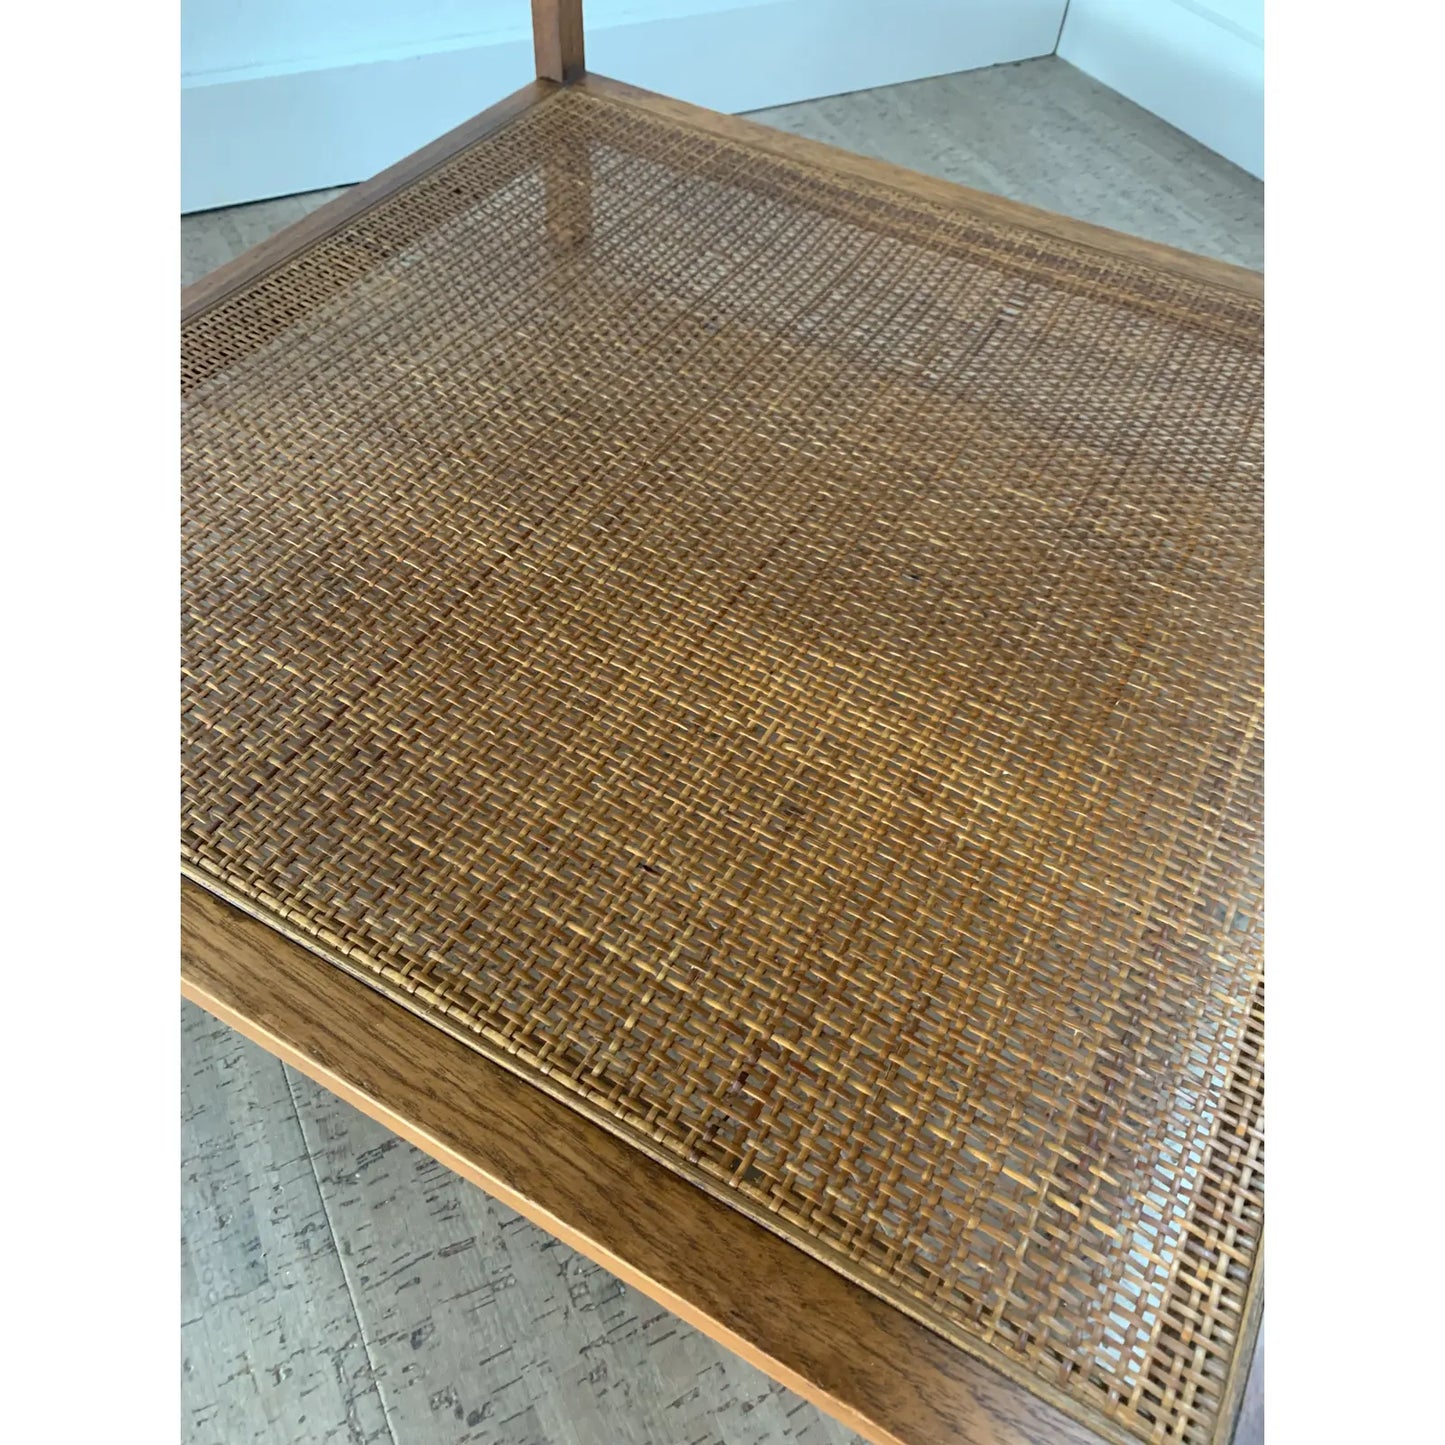 Mid 20th Century Walnut Side Table With Woven Cane Shelf